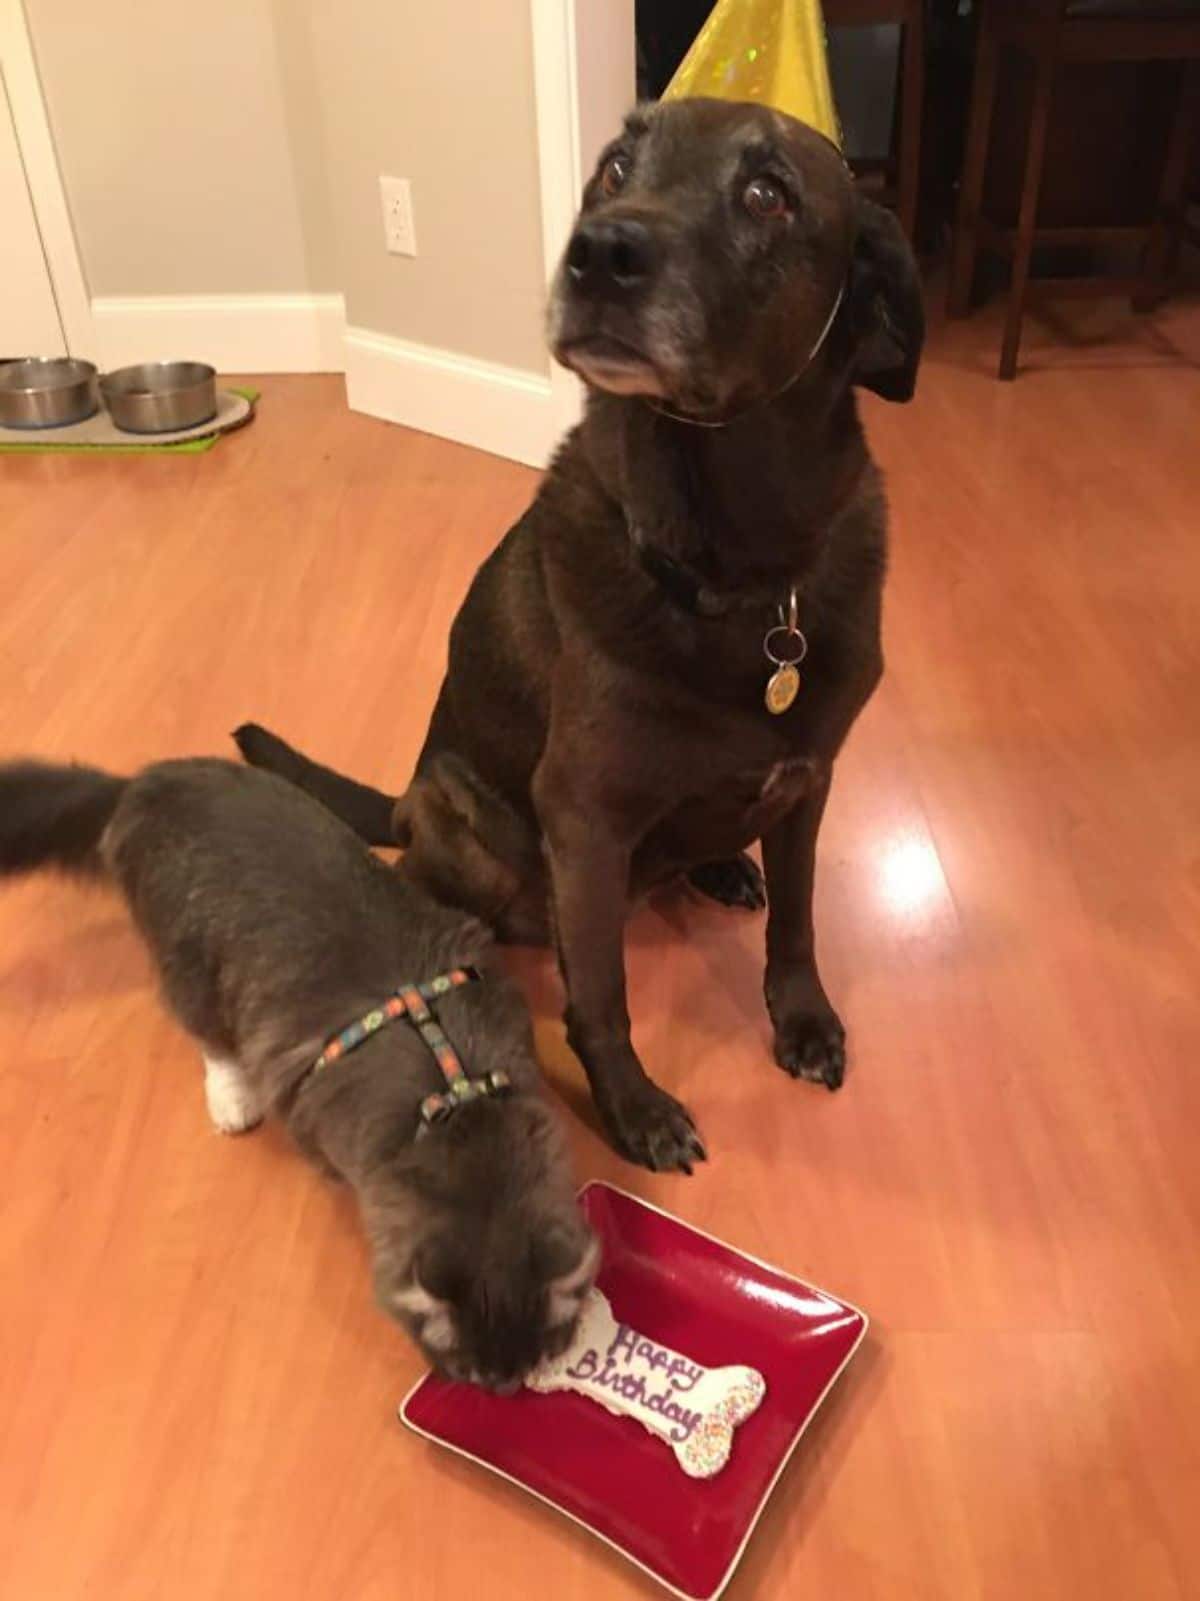 confused black dog in a party hat with a grey and white cat eating the dog's birthday cake on a red plate